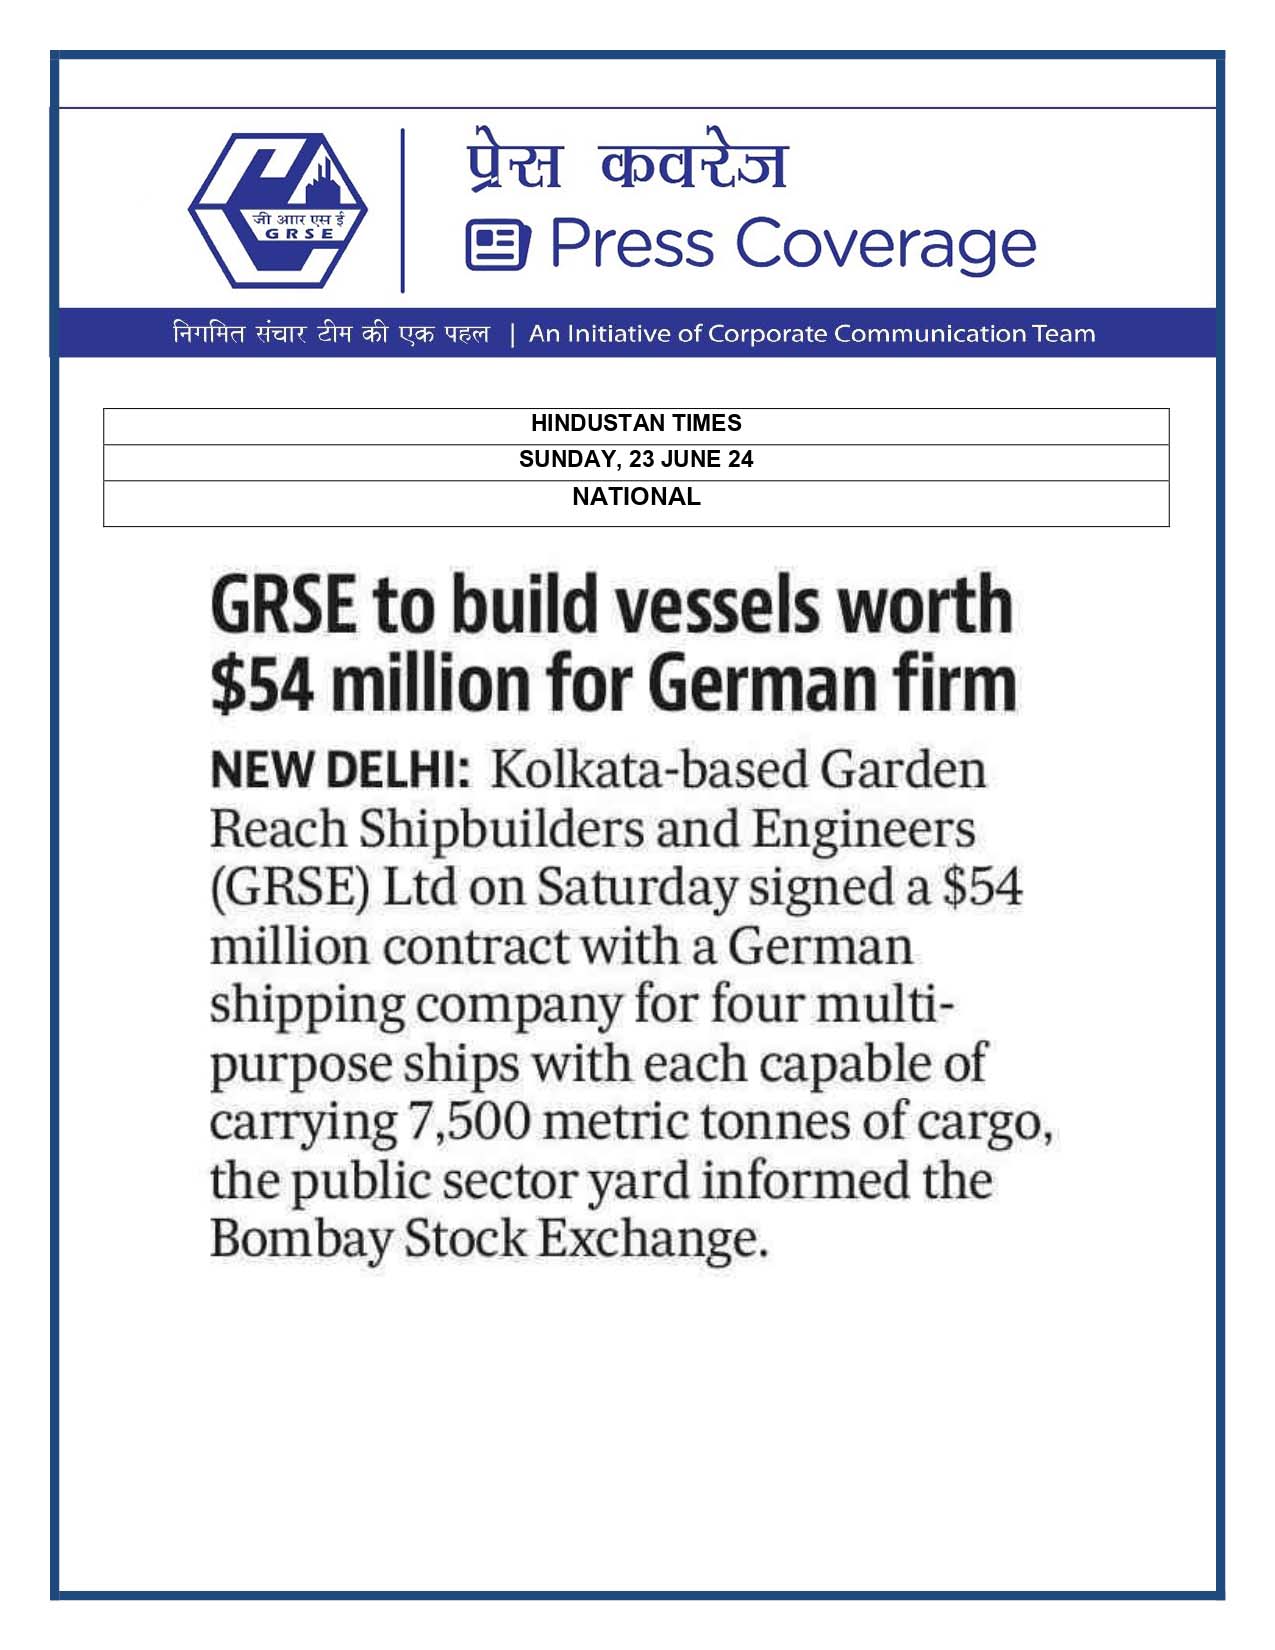 Press Coverage : Hindustan Times, 23 Jun 24 : GRSE to build vessels worth $54 Million for German Firm